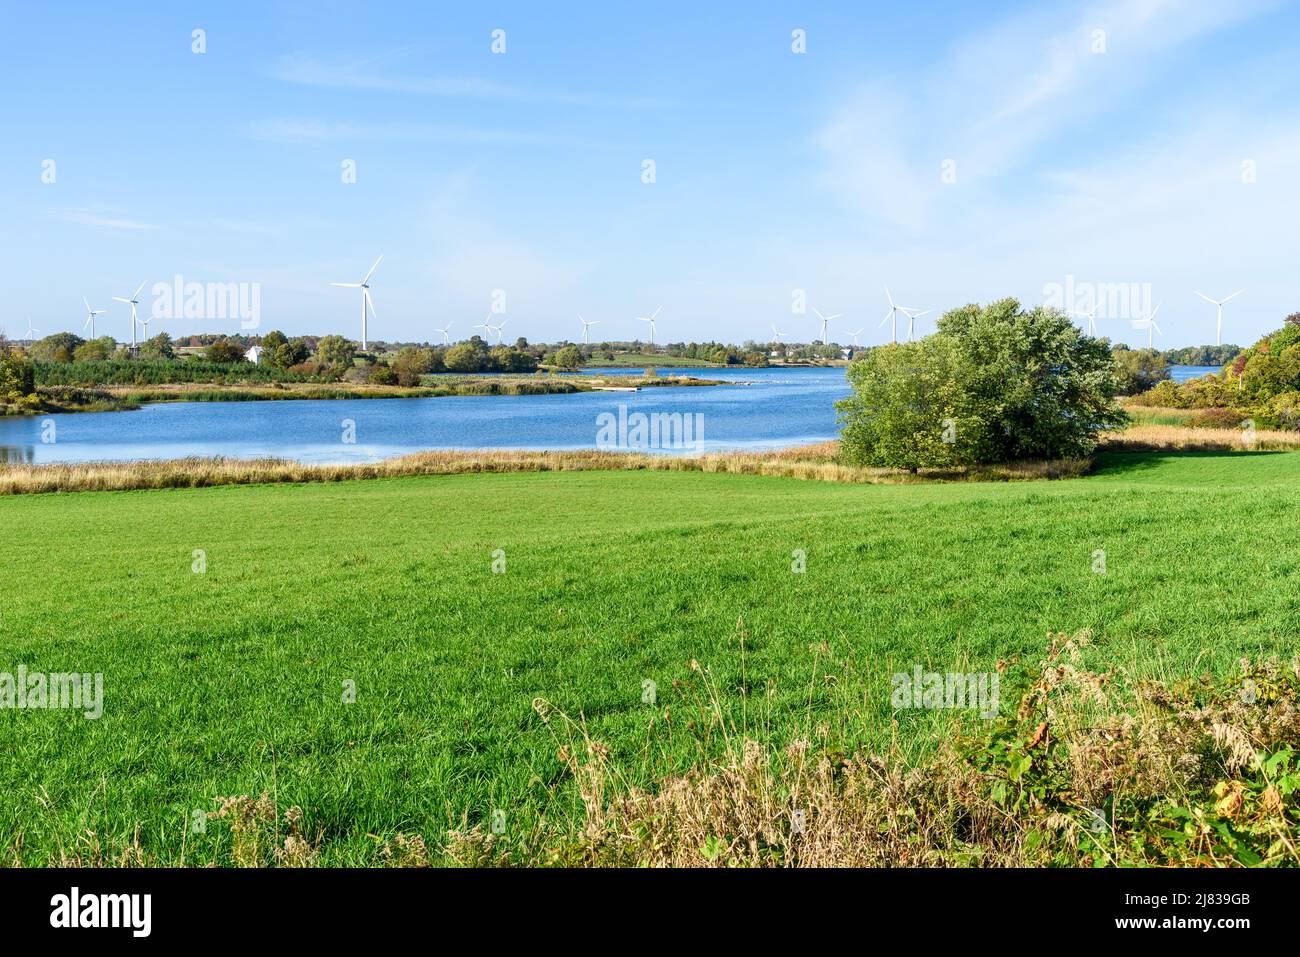 Wind turbines in a idyllic rural landscape on a clear autumn day. A river is in foreground. Stock Photo